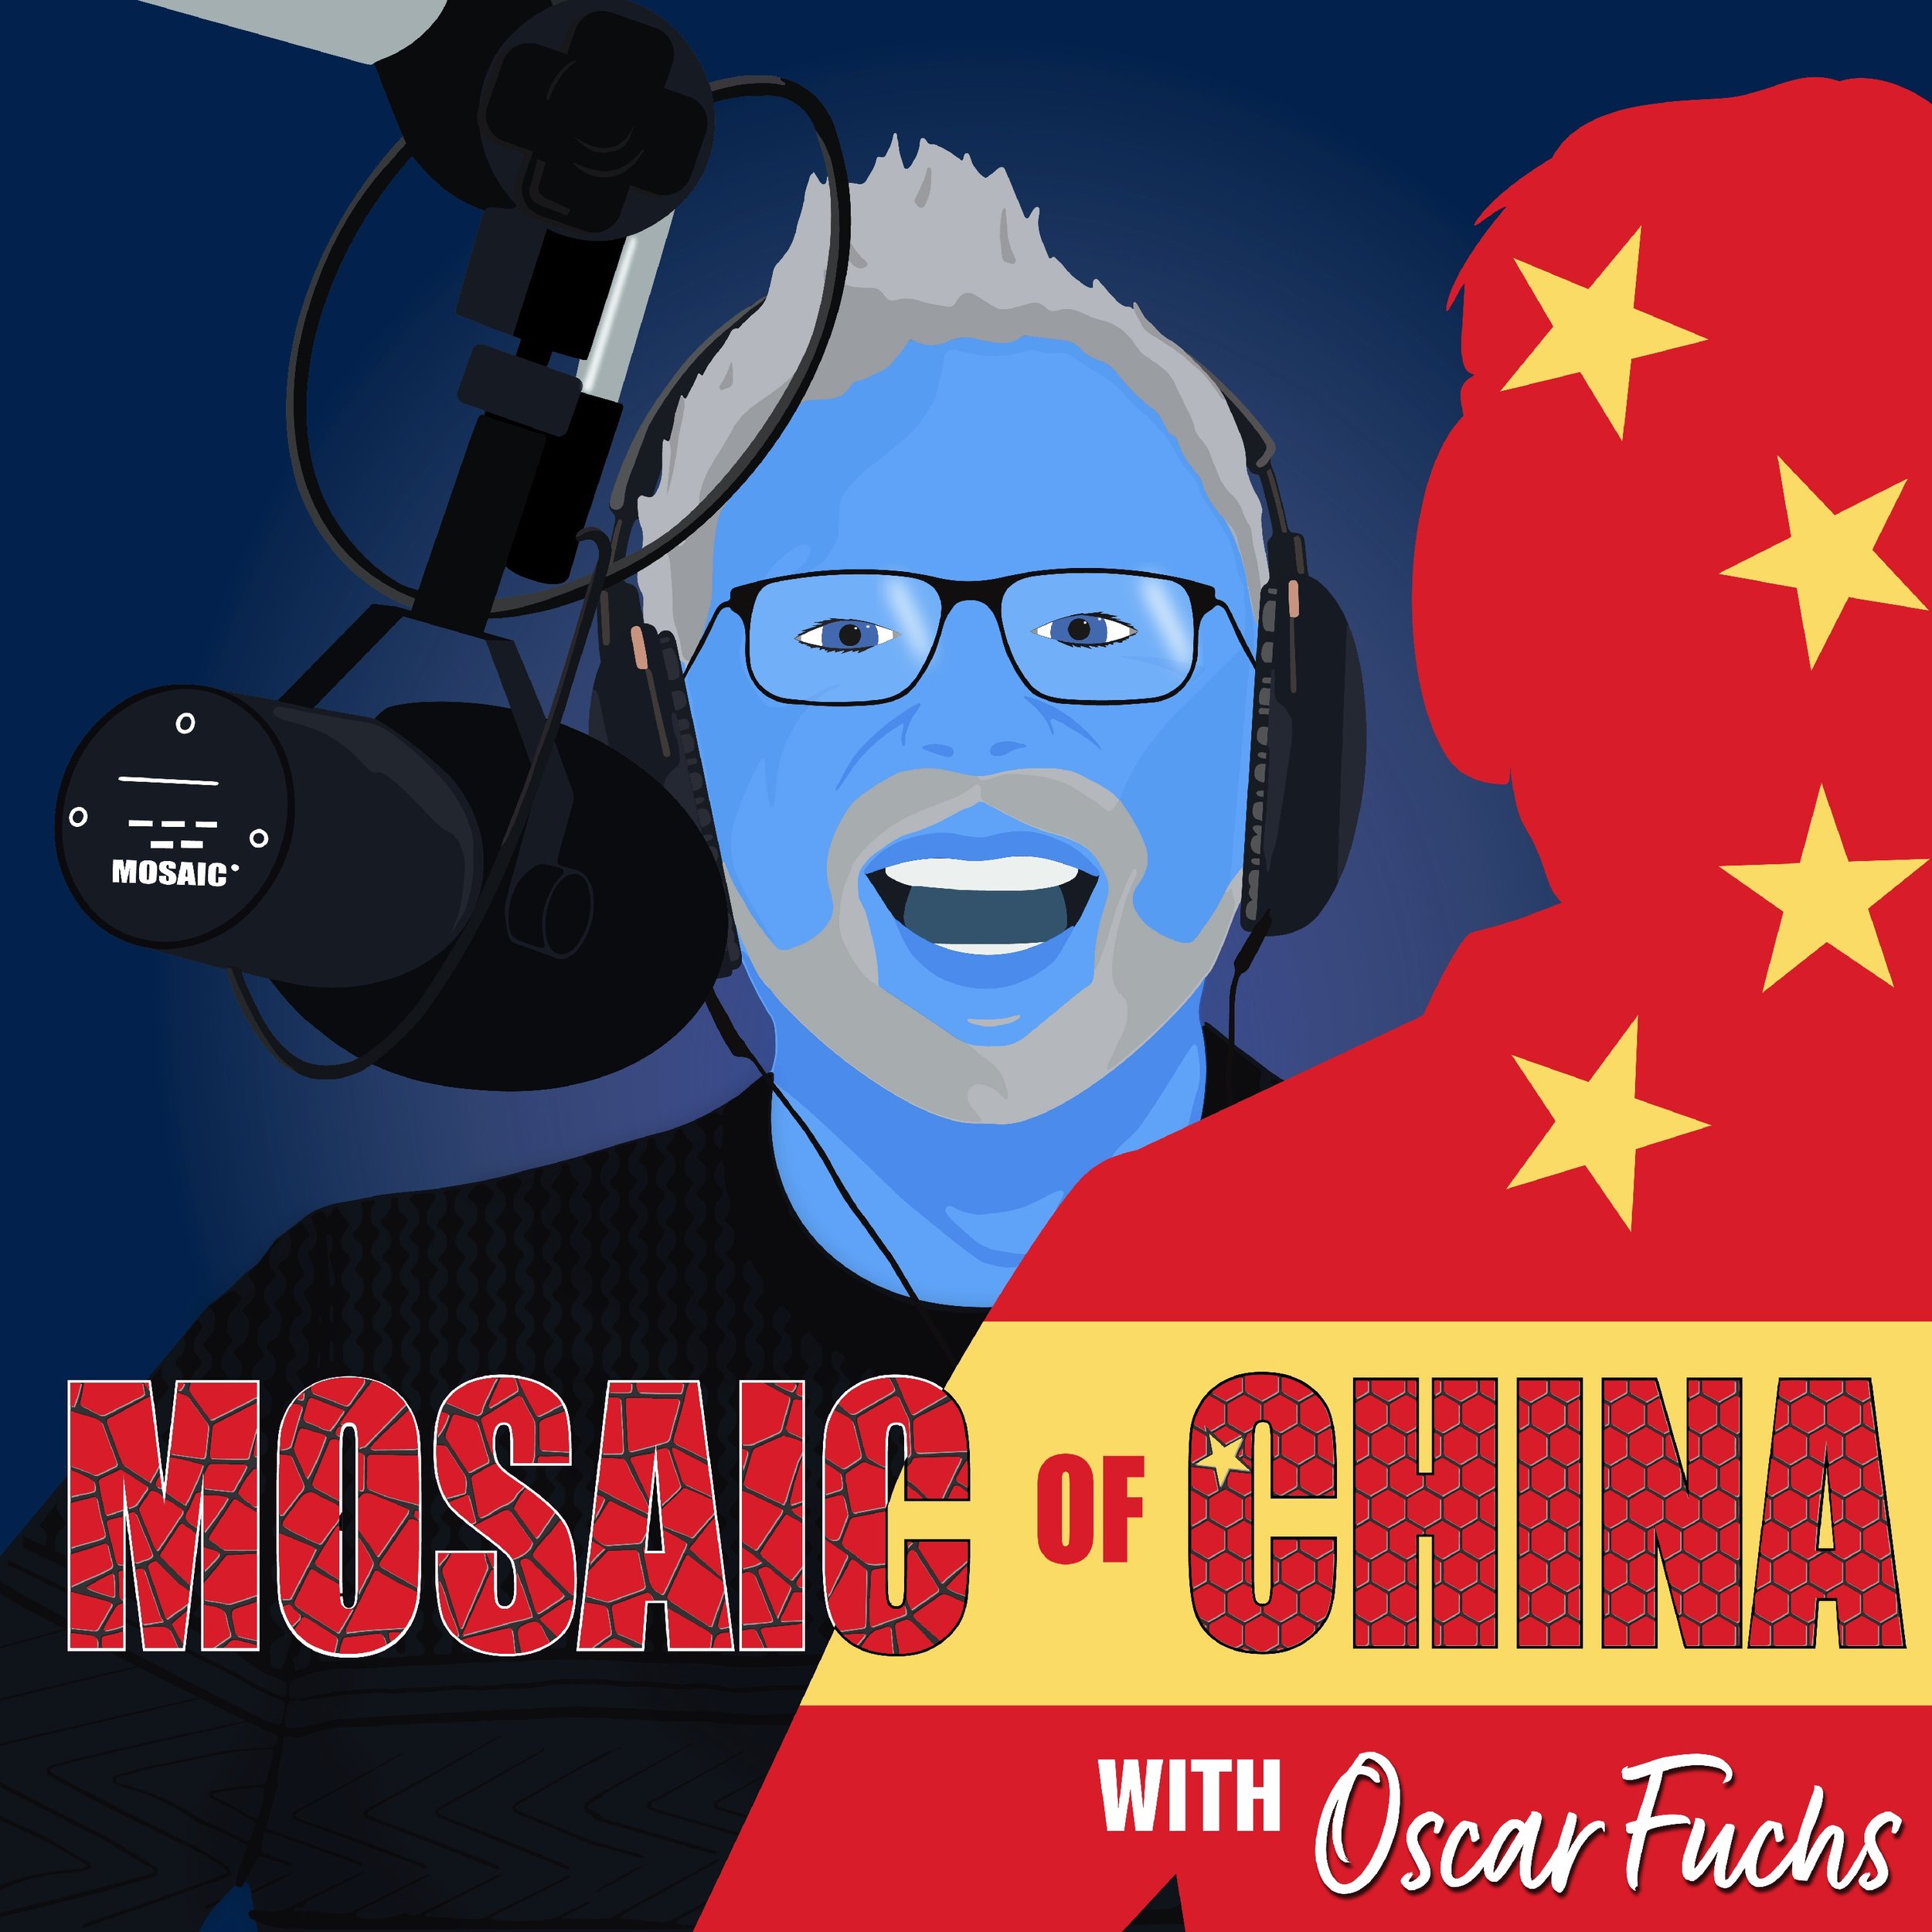 The new logo for the podcast.